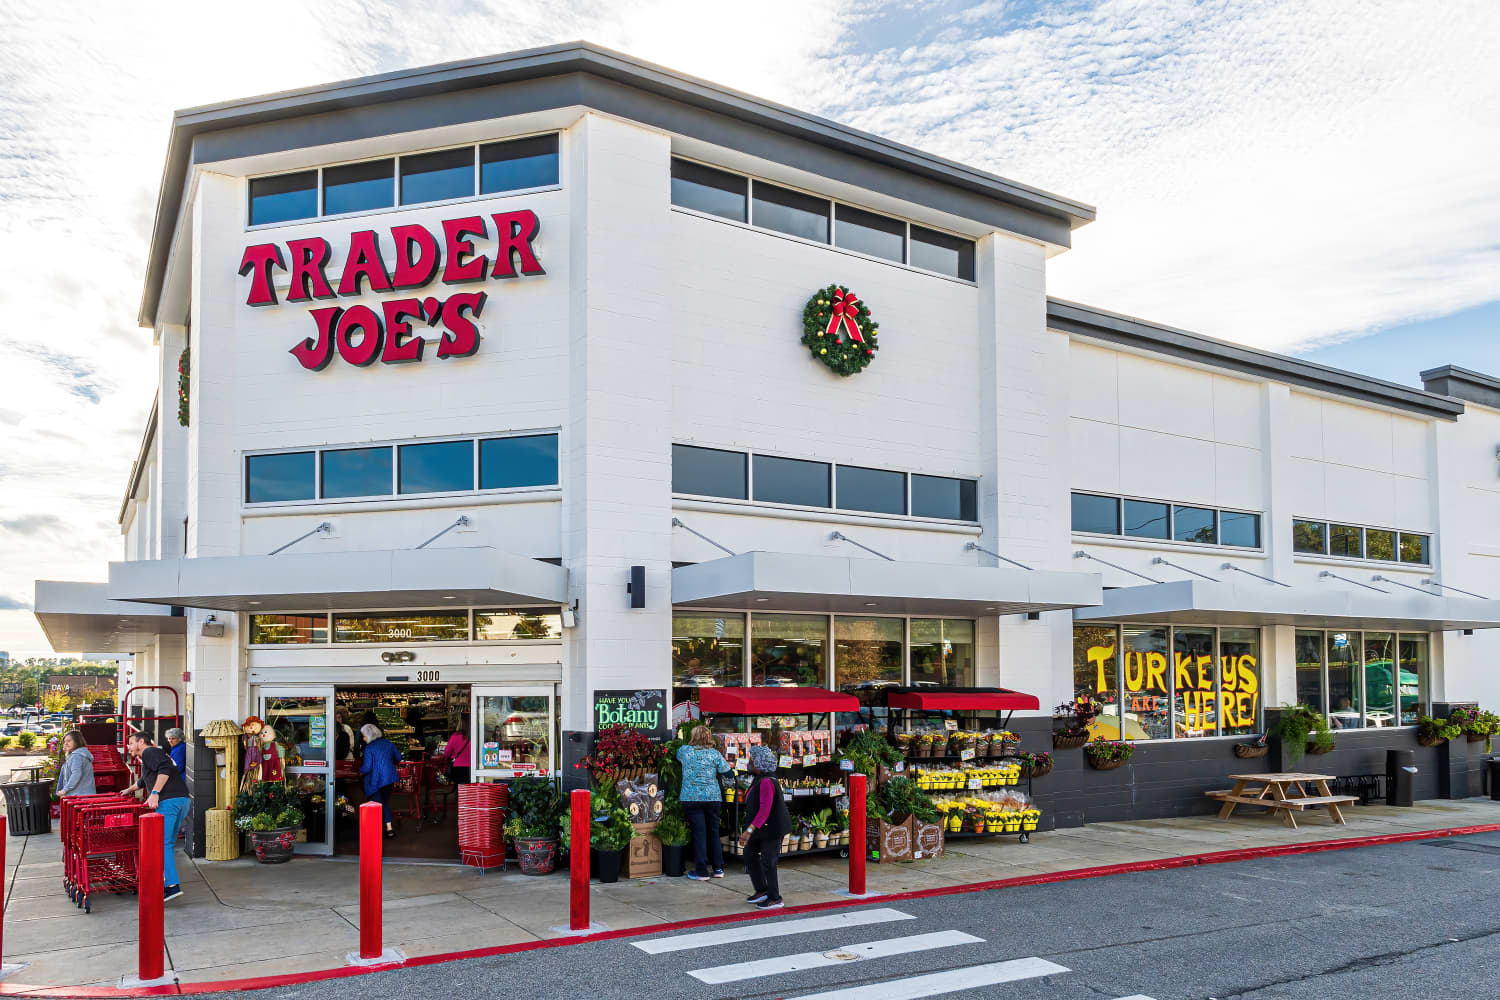 Trader Joe’s Just Brought Back Its Famous “Luxury” Grocery, and It’s the Best $4 You’ll Spend This Week